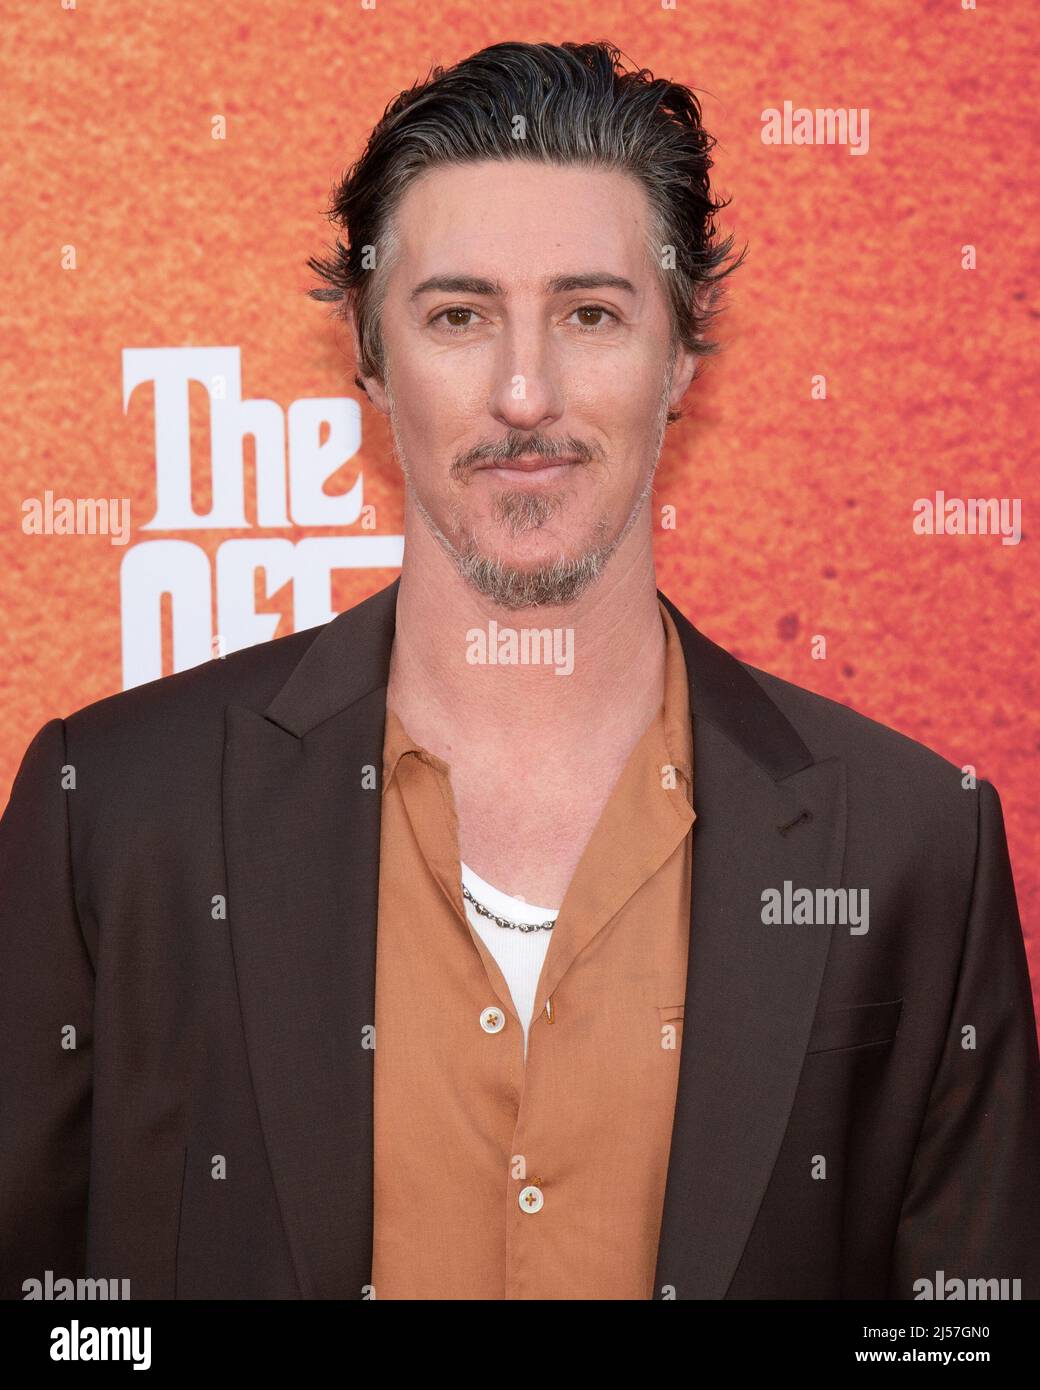 April 20, 2022, Los Angeles, CAlifornia, USA Eric Balfour attends the